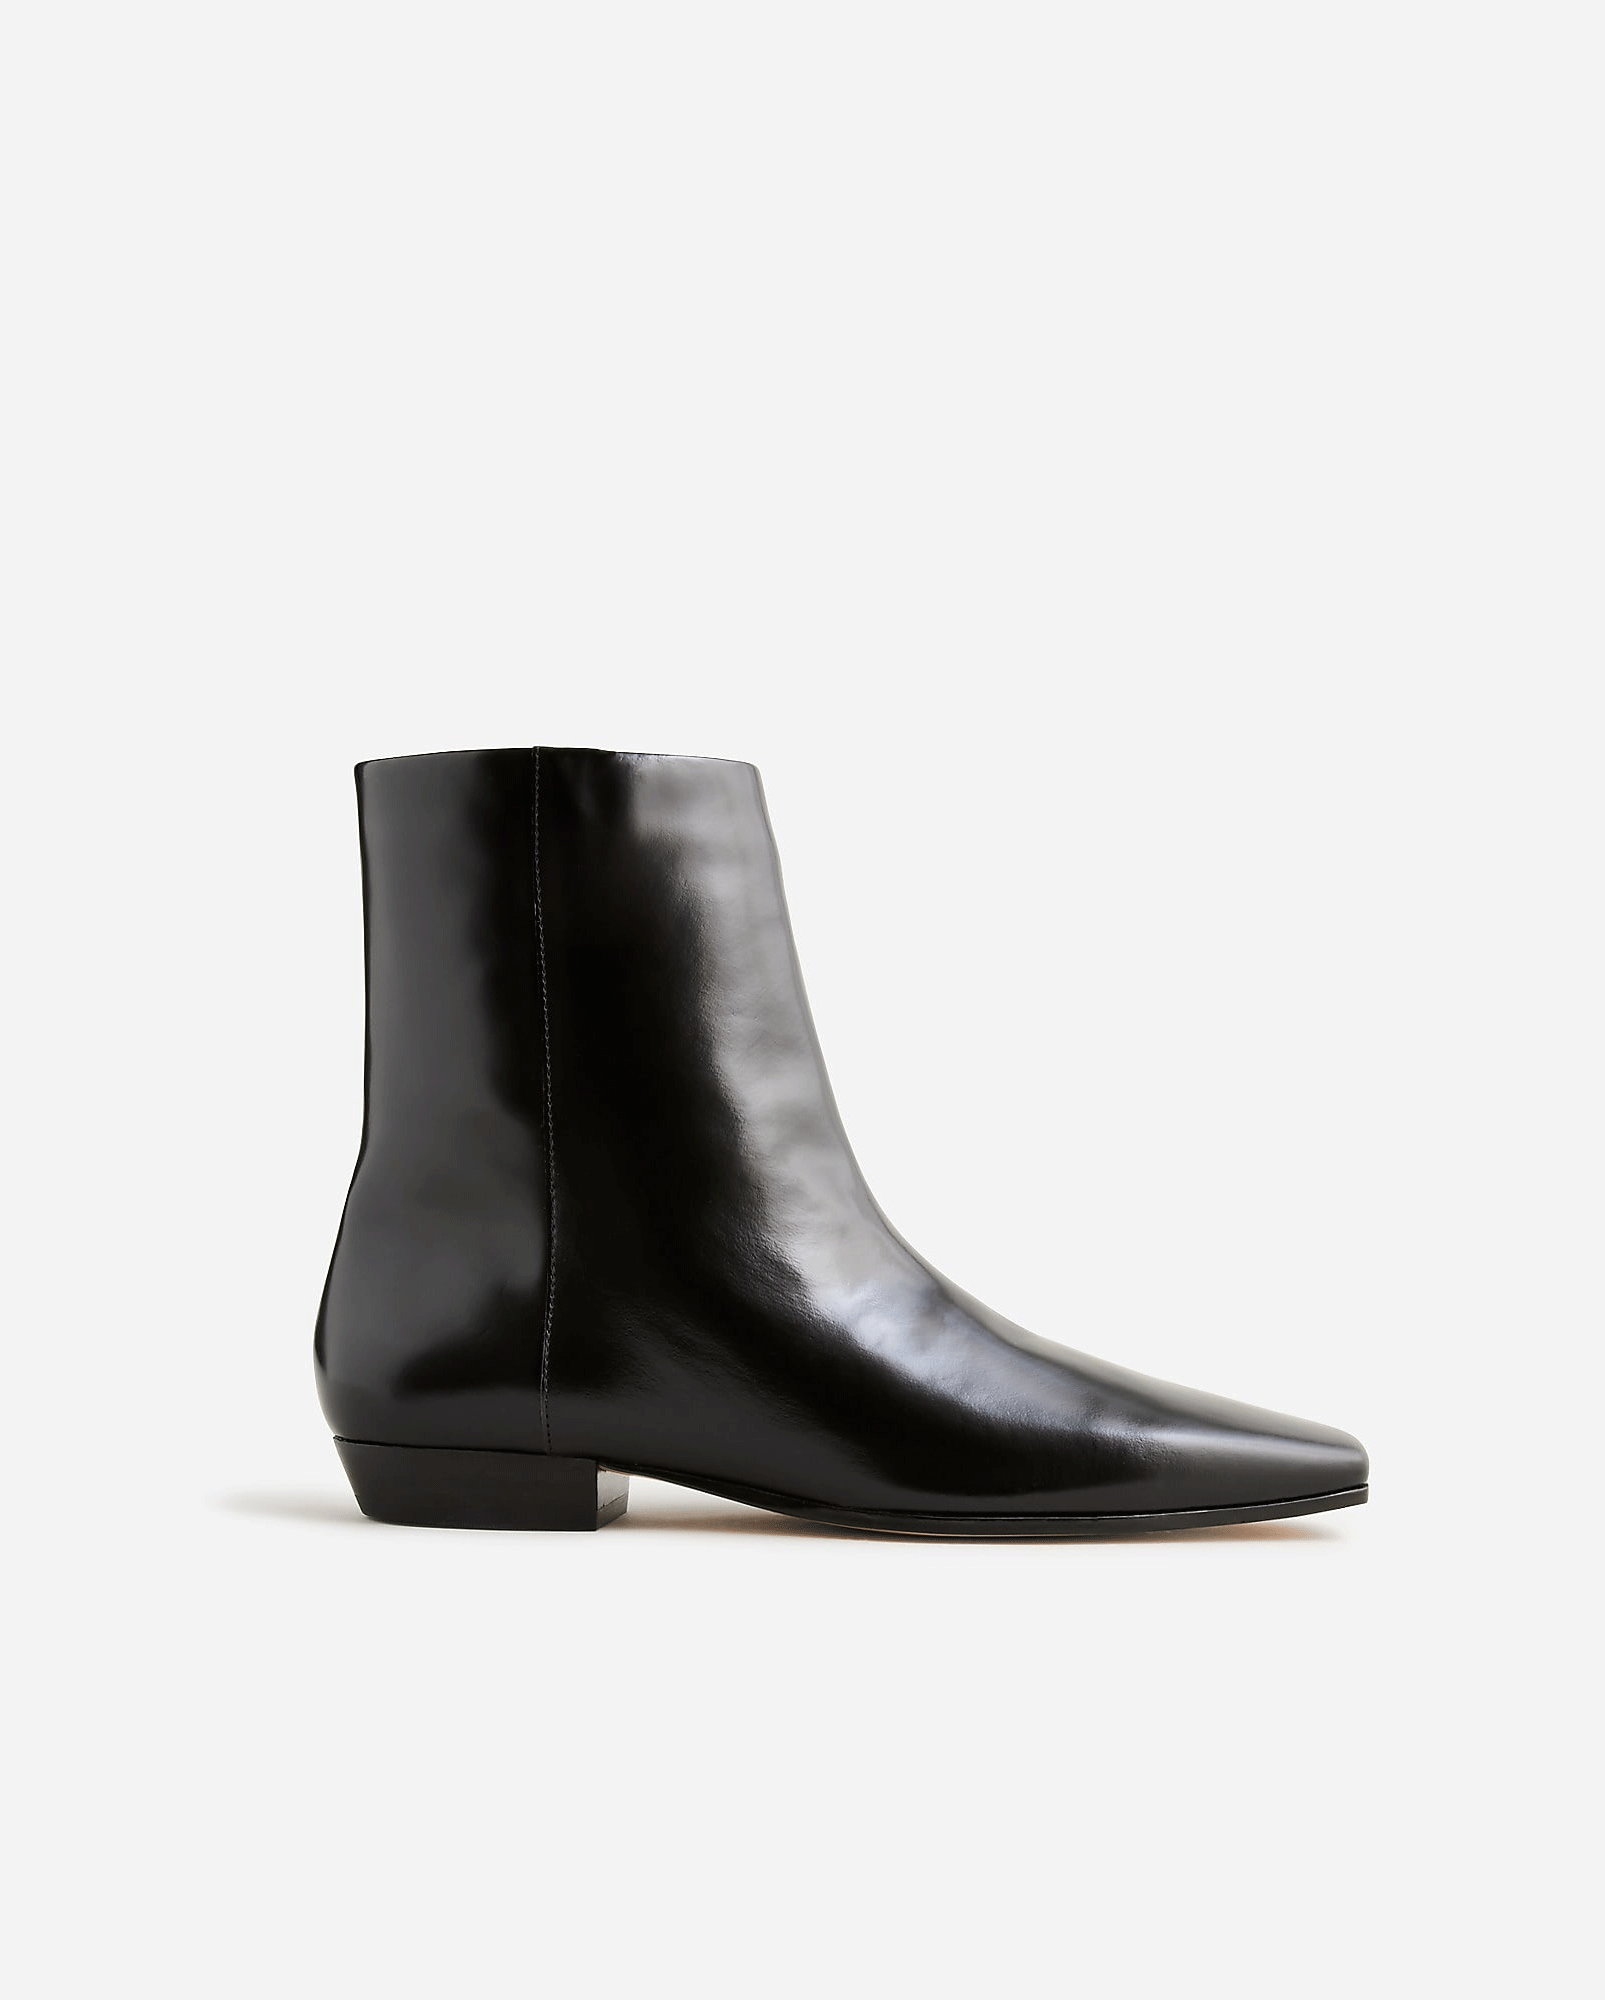 J.Crew + Square-Toe Ankle Boots